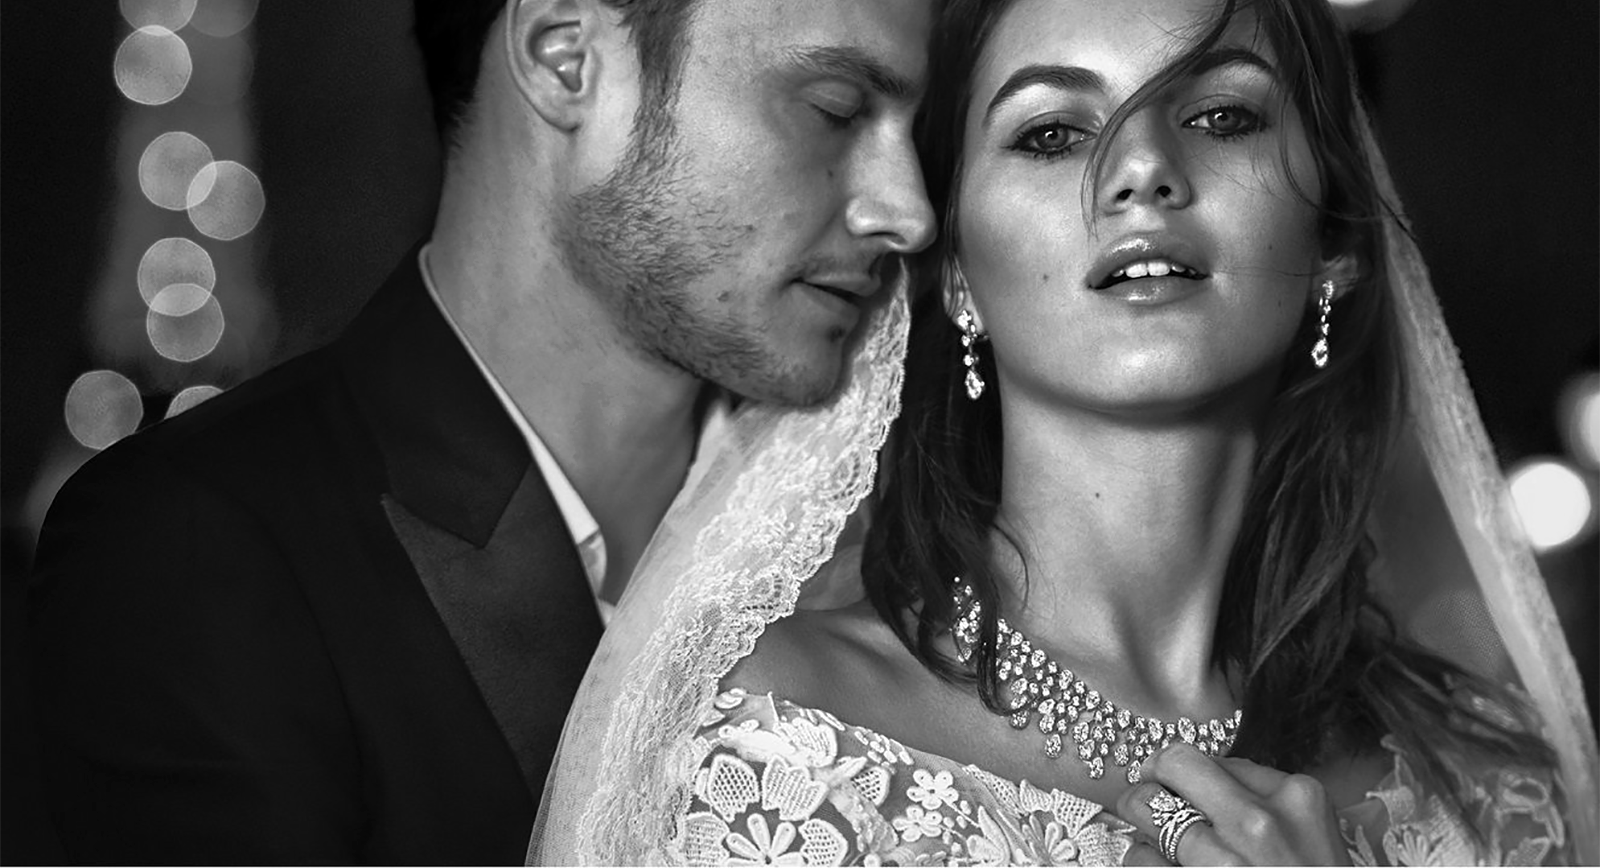 Two Eponymous Jewellery Houses Launched Bridal Films for the Wedding Season